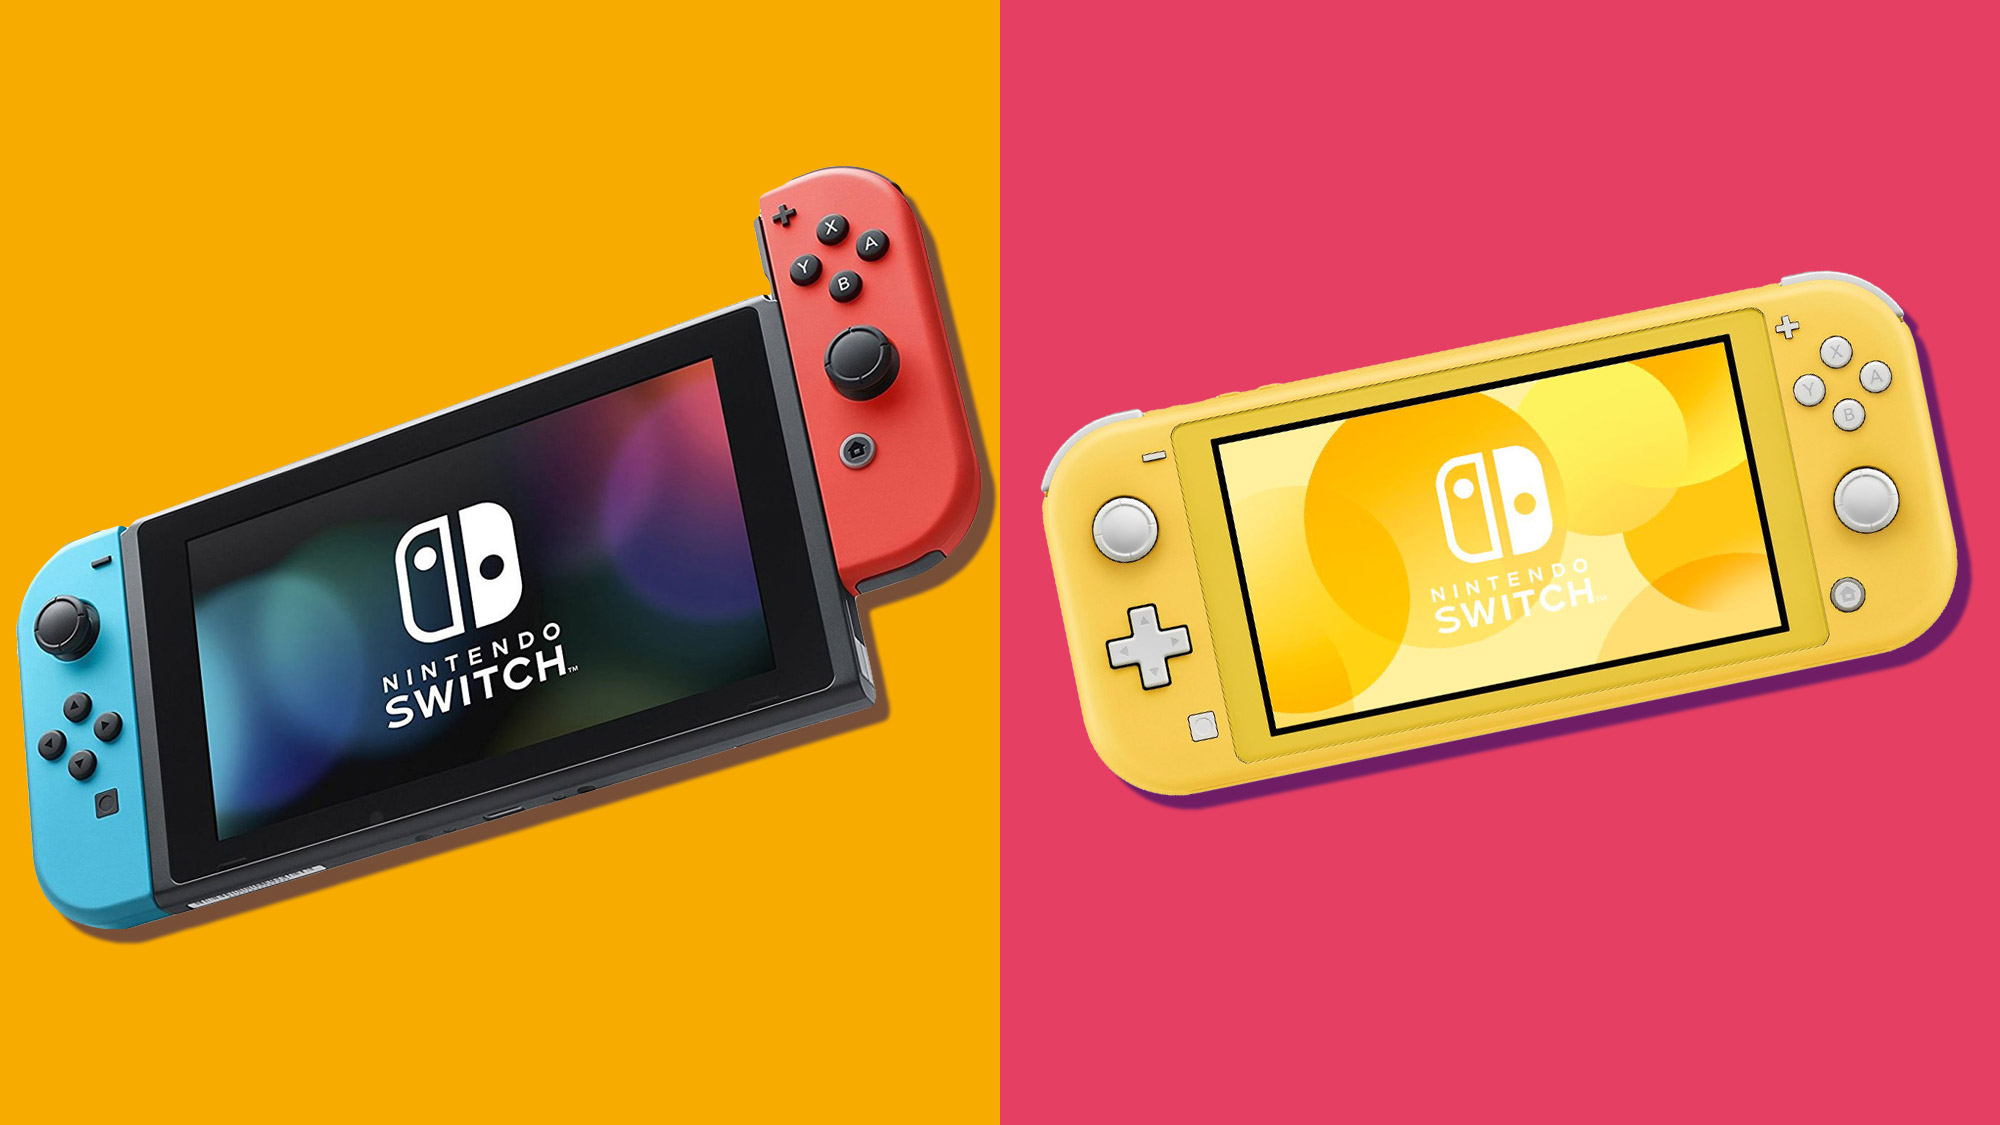 having a switch and switch lite